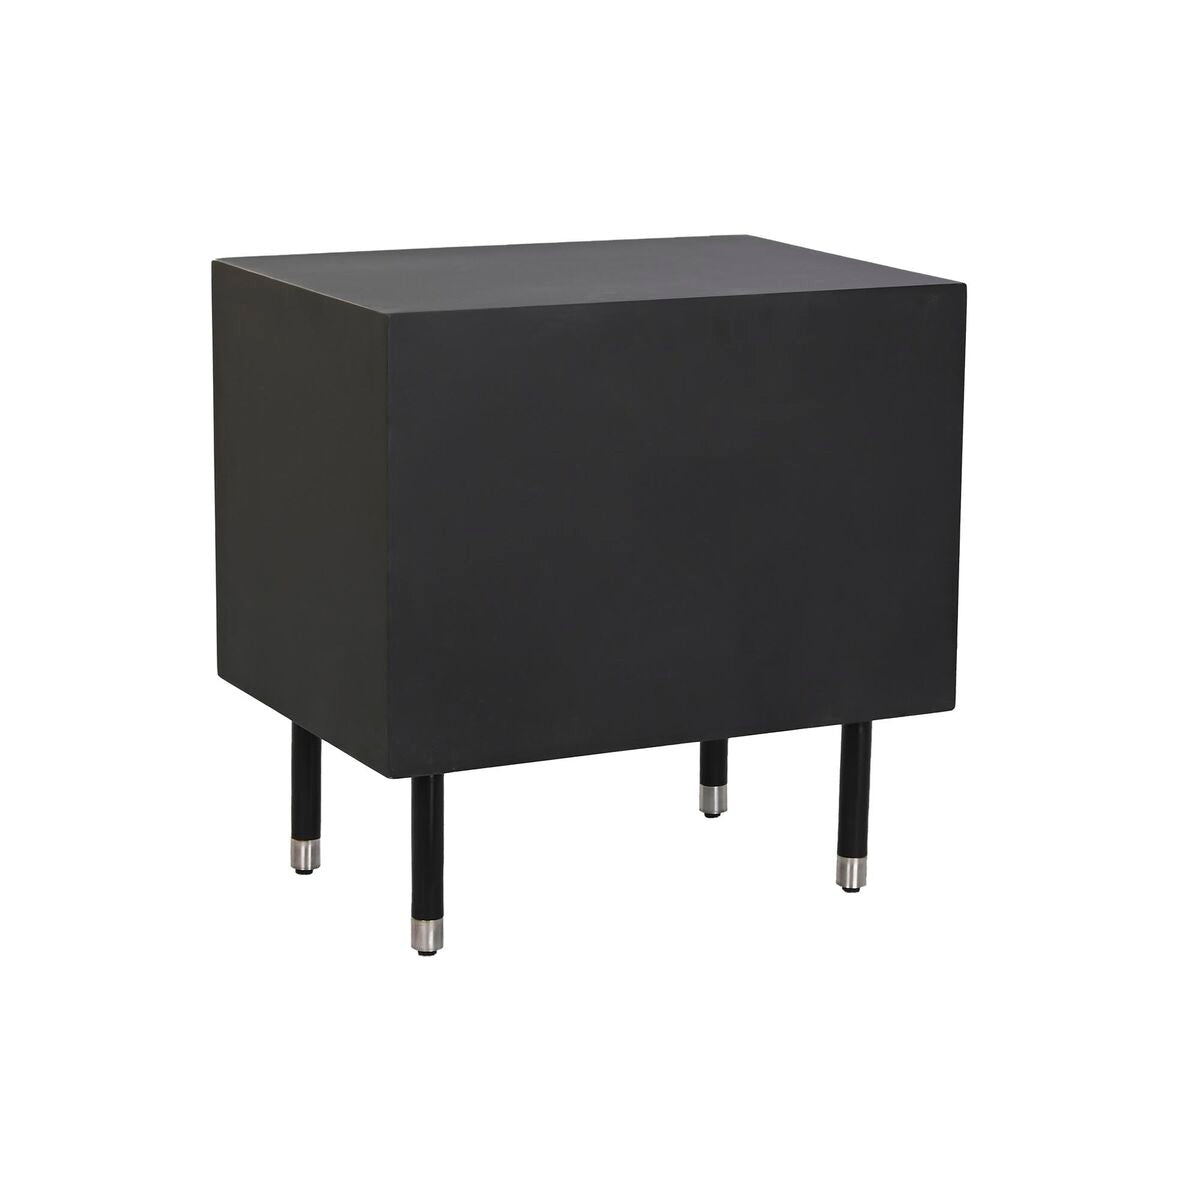 Black Grey Bedside Table with Silver Details (50 x 35 x 51 cm)